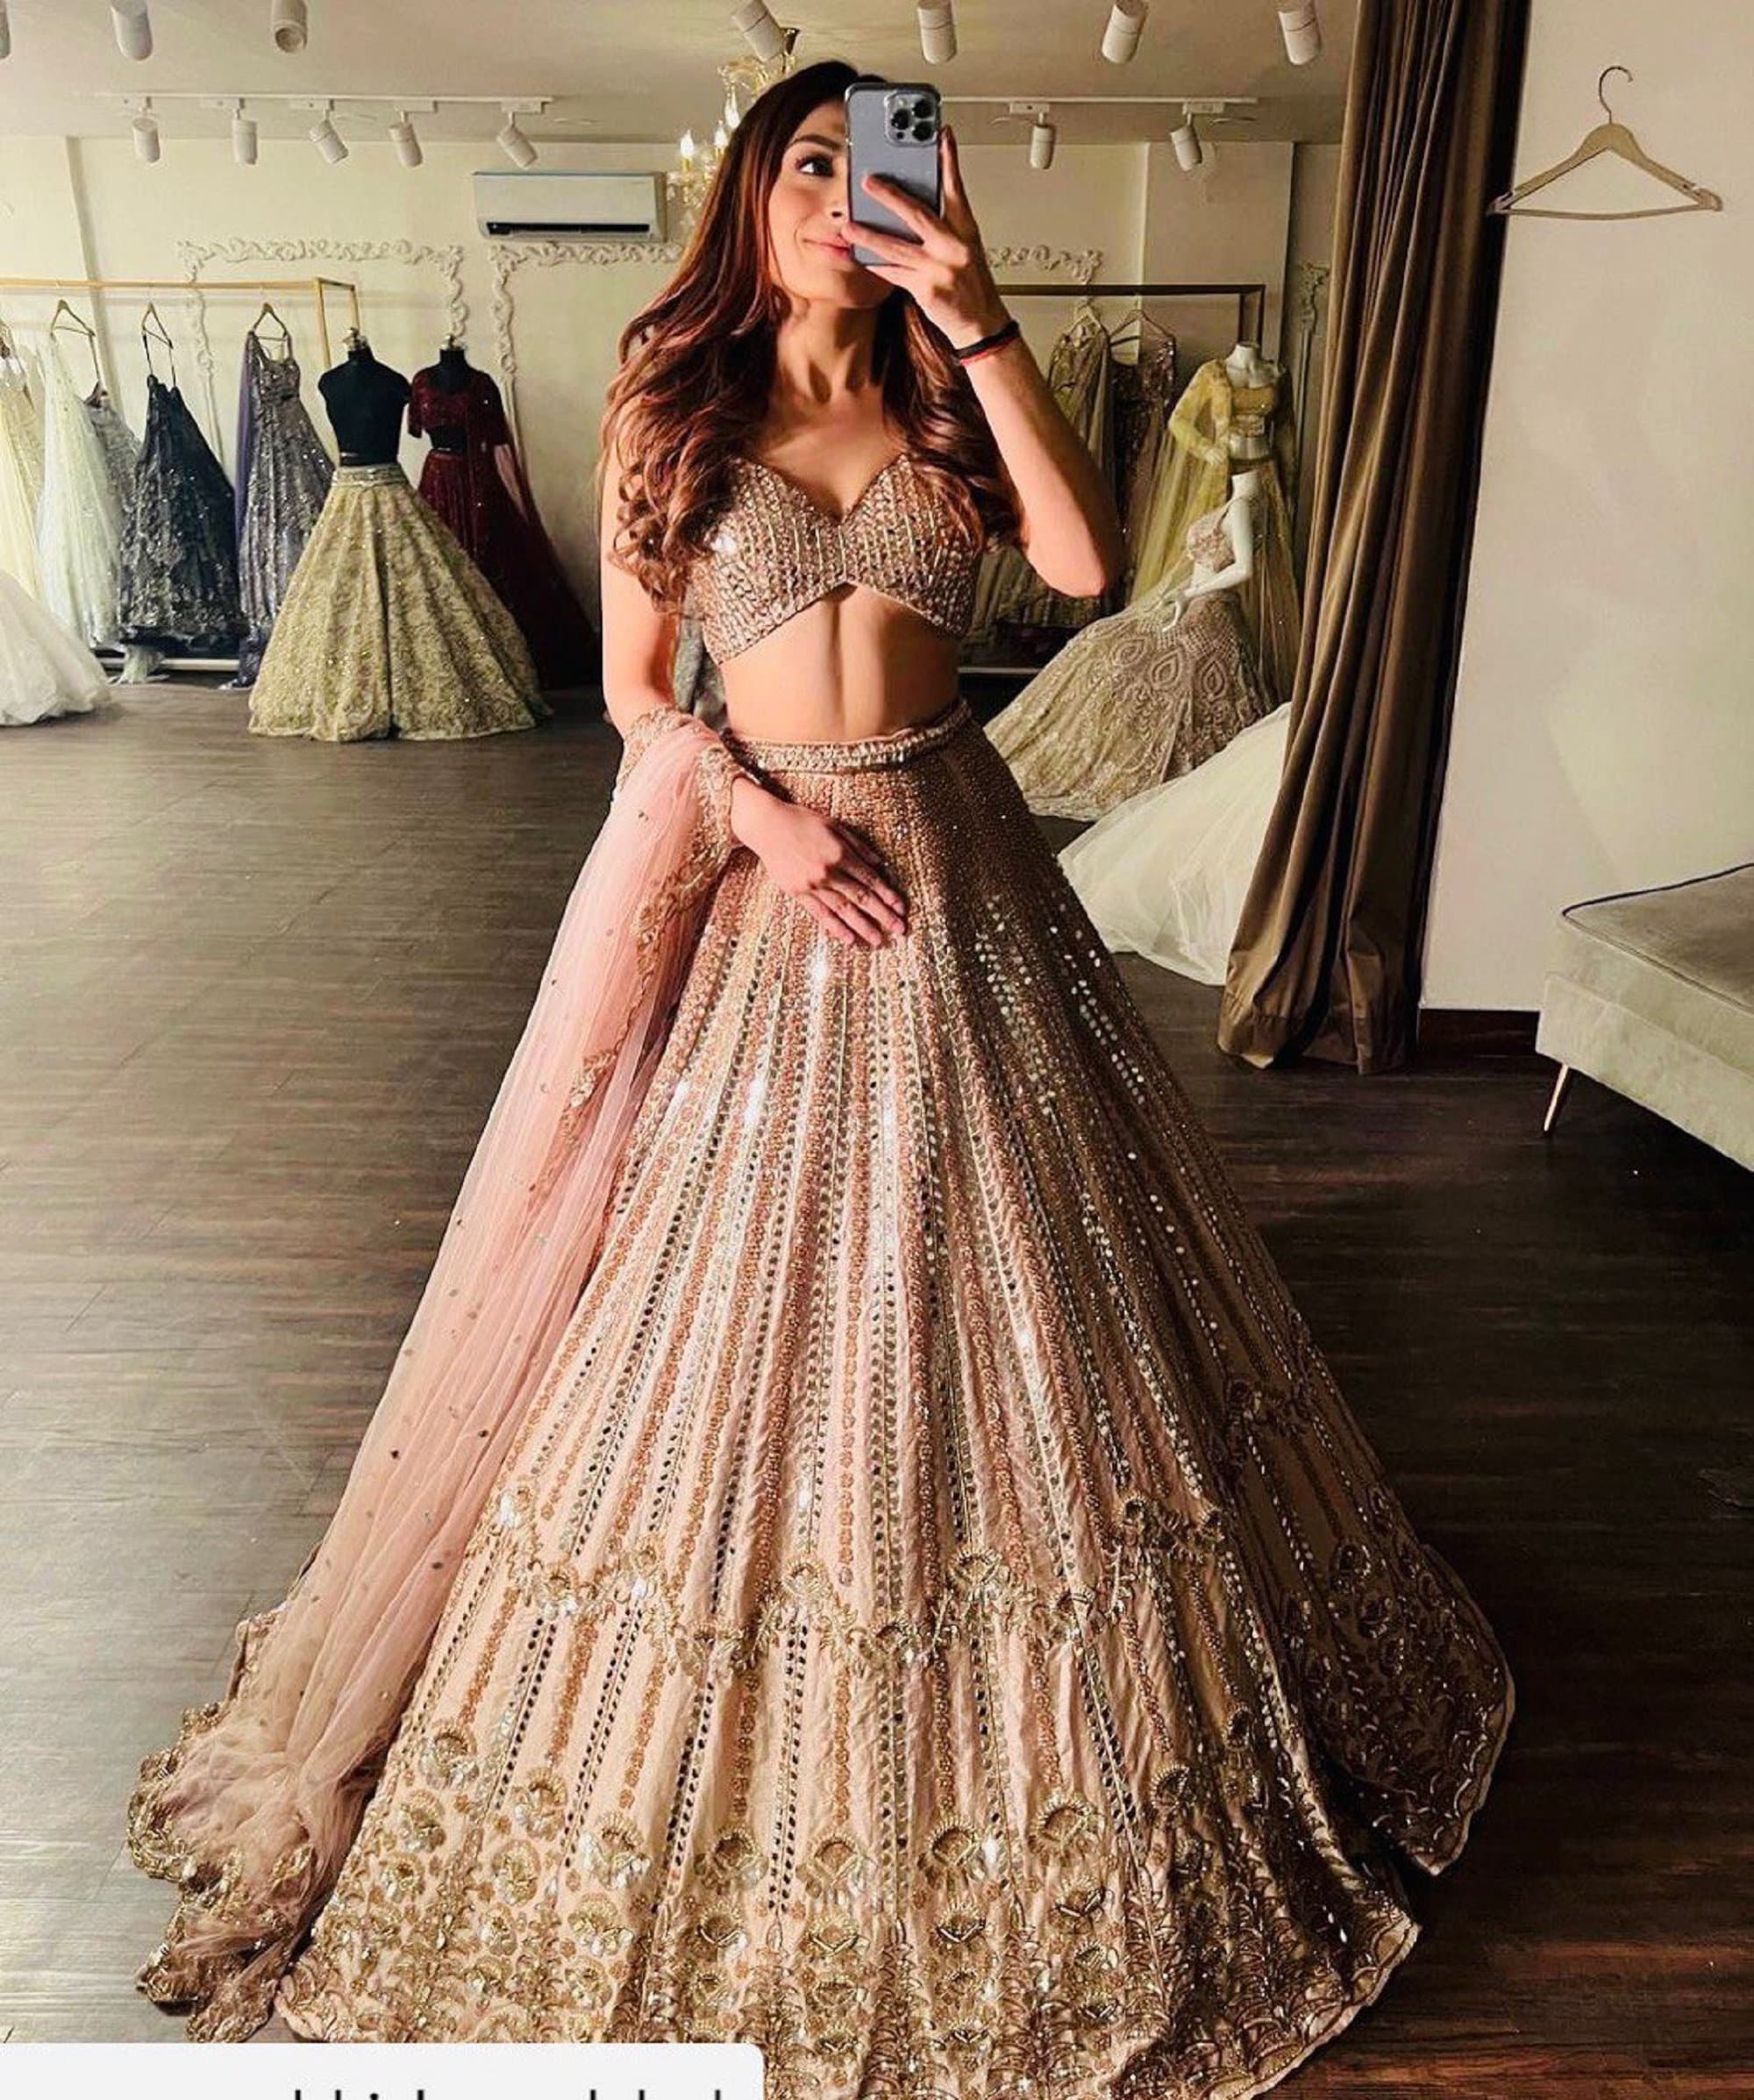 This bride's Sabyasachi lehenga is an exact copy of Deepika Padukone's  wedding outfit - Times of India